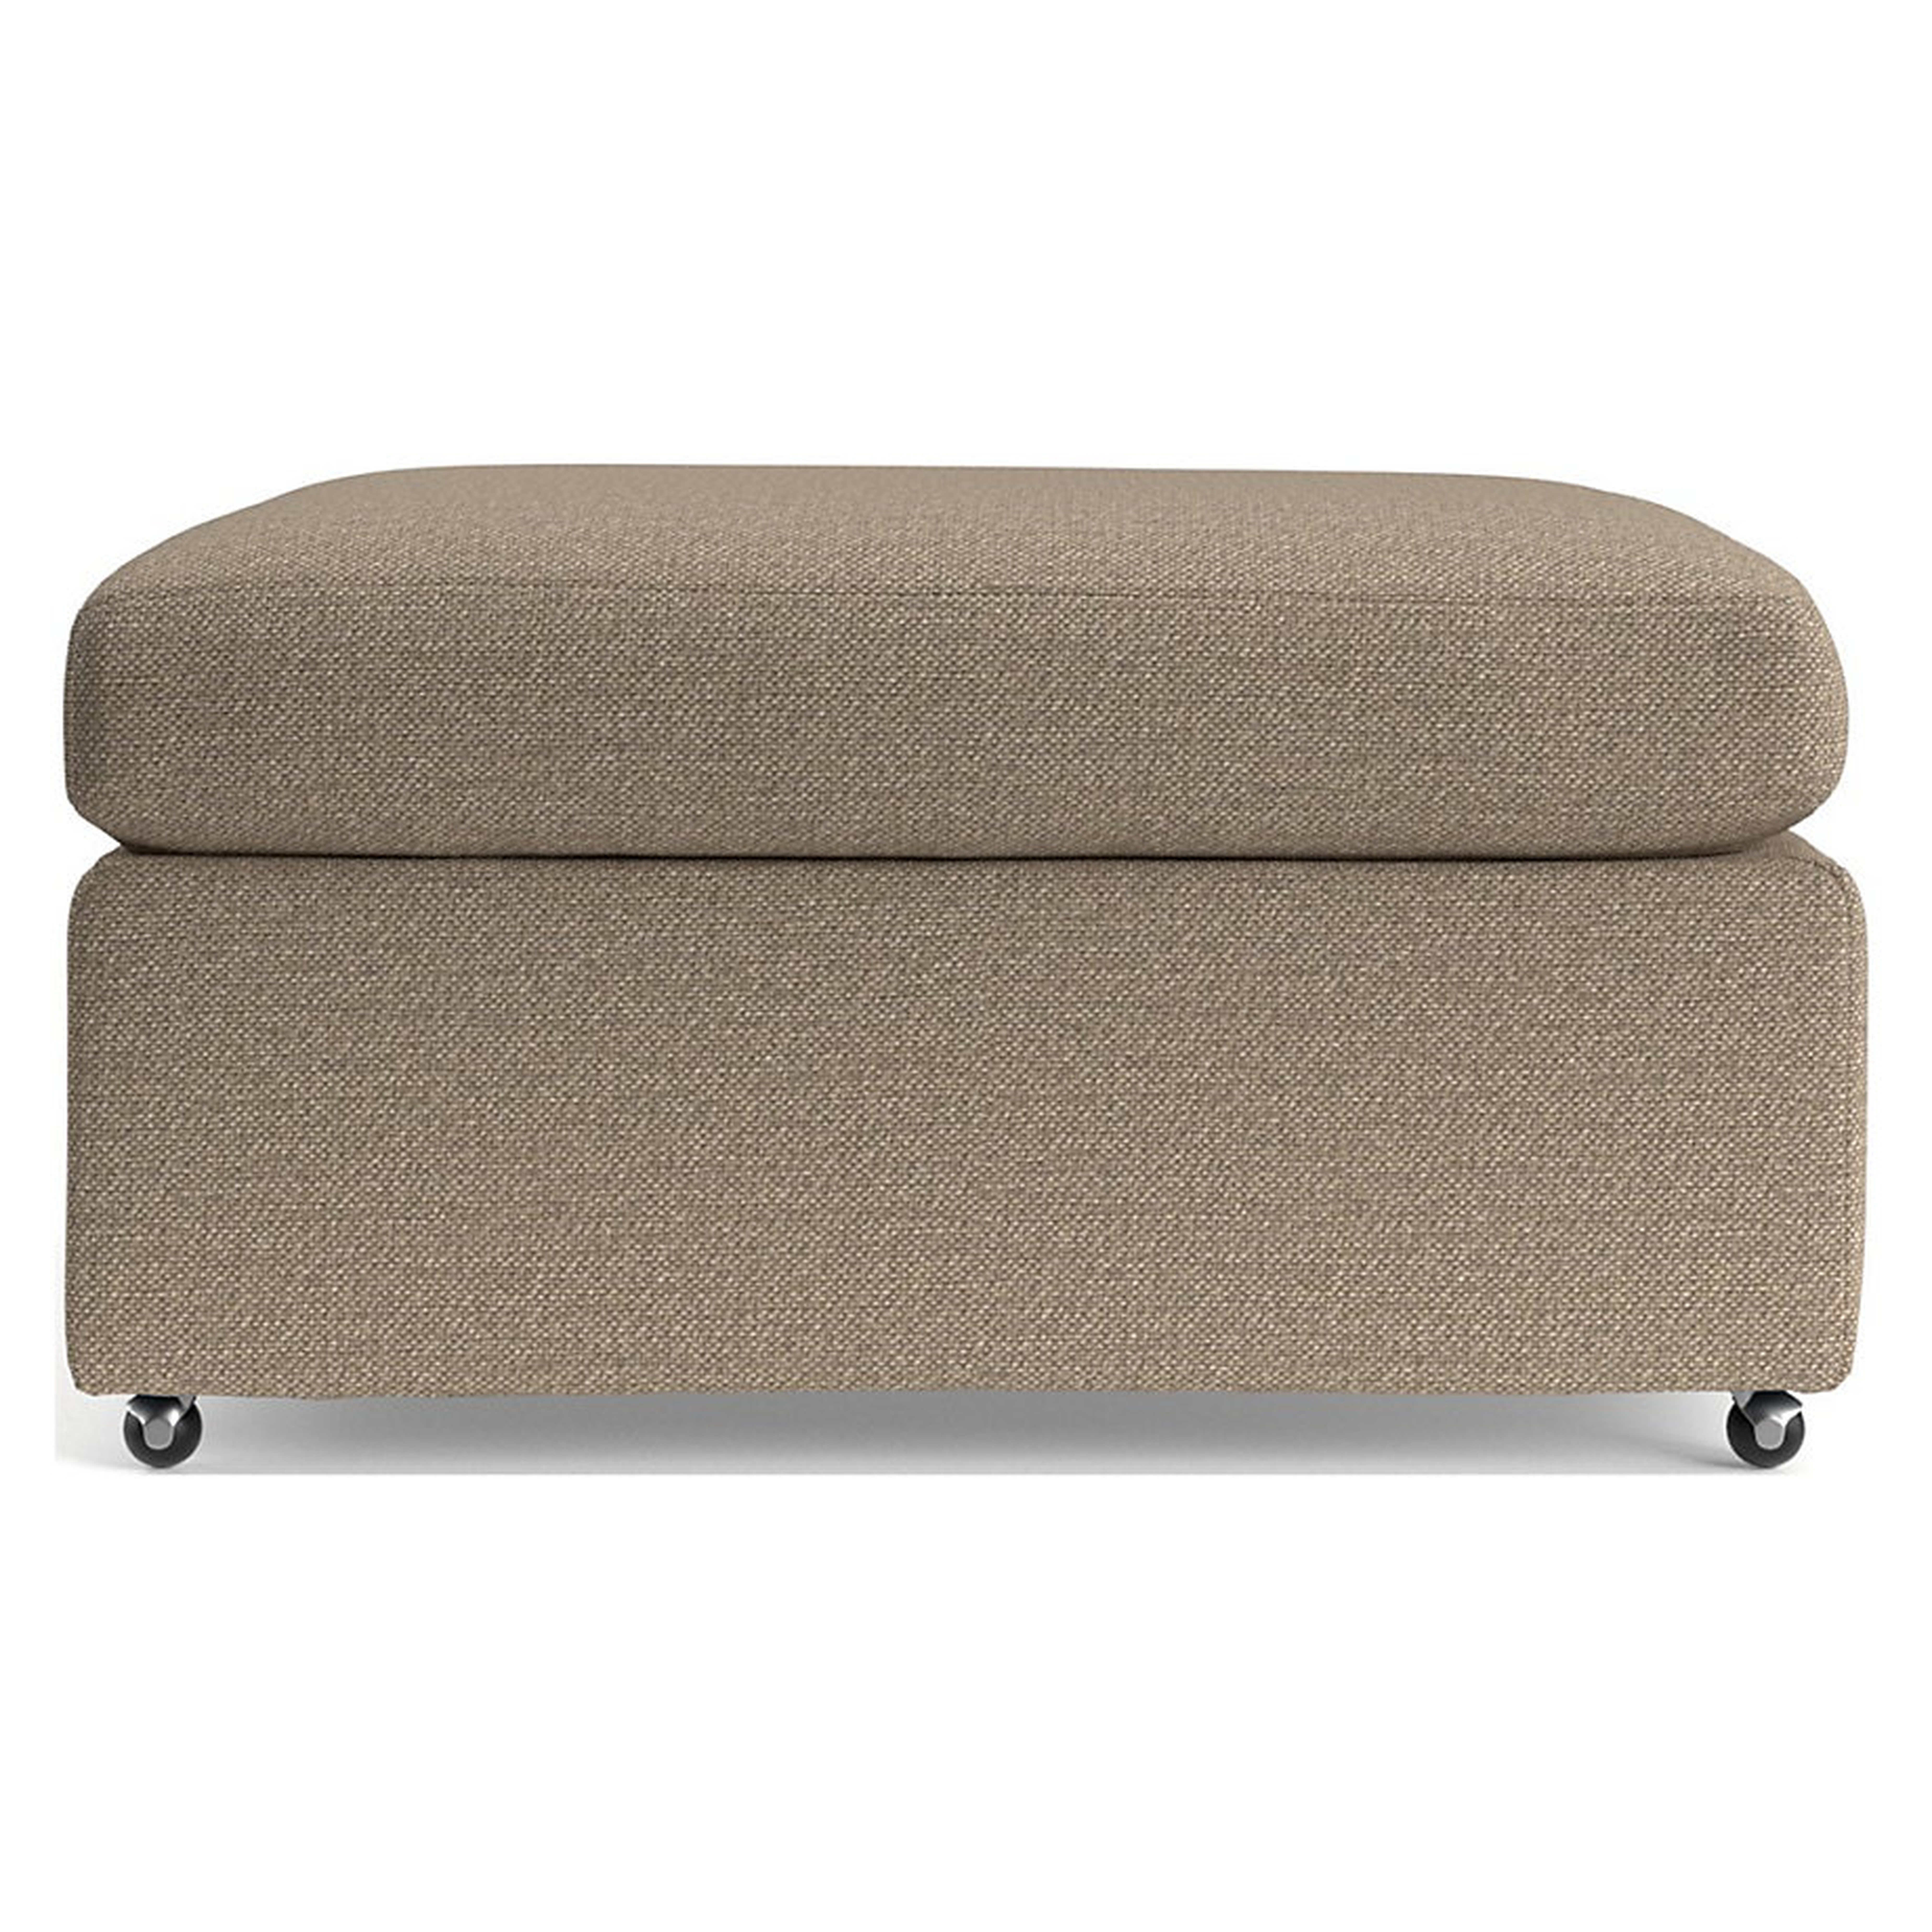 Lounge 32" Ottoman - Crate and Barrel